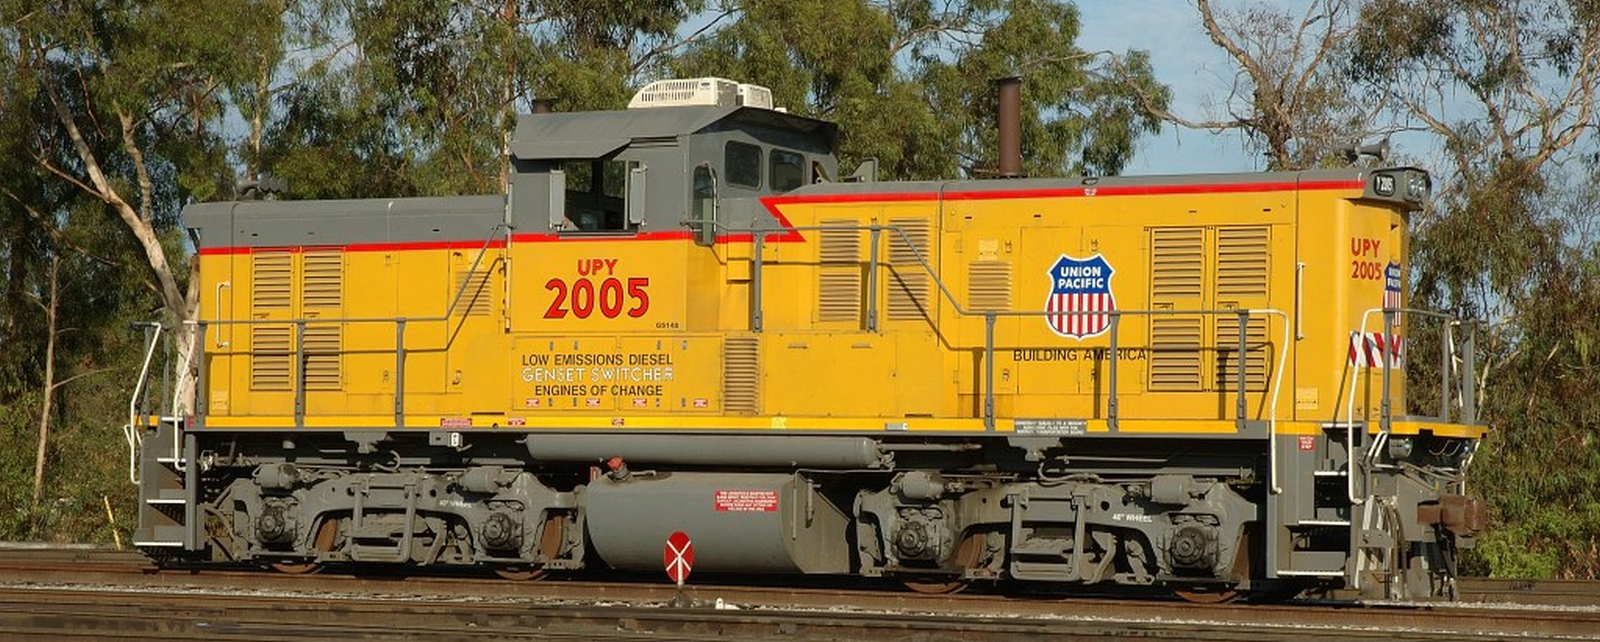 Union Pacific No. 2005, a former EMD MP15, in October 2008 at Carson, California